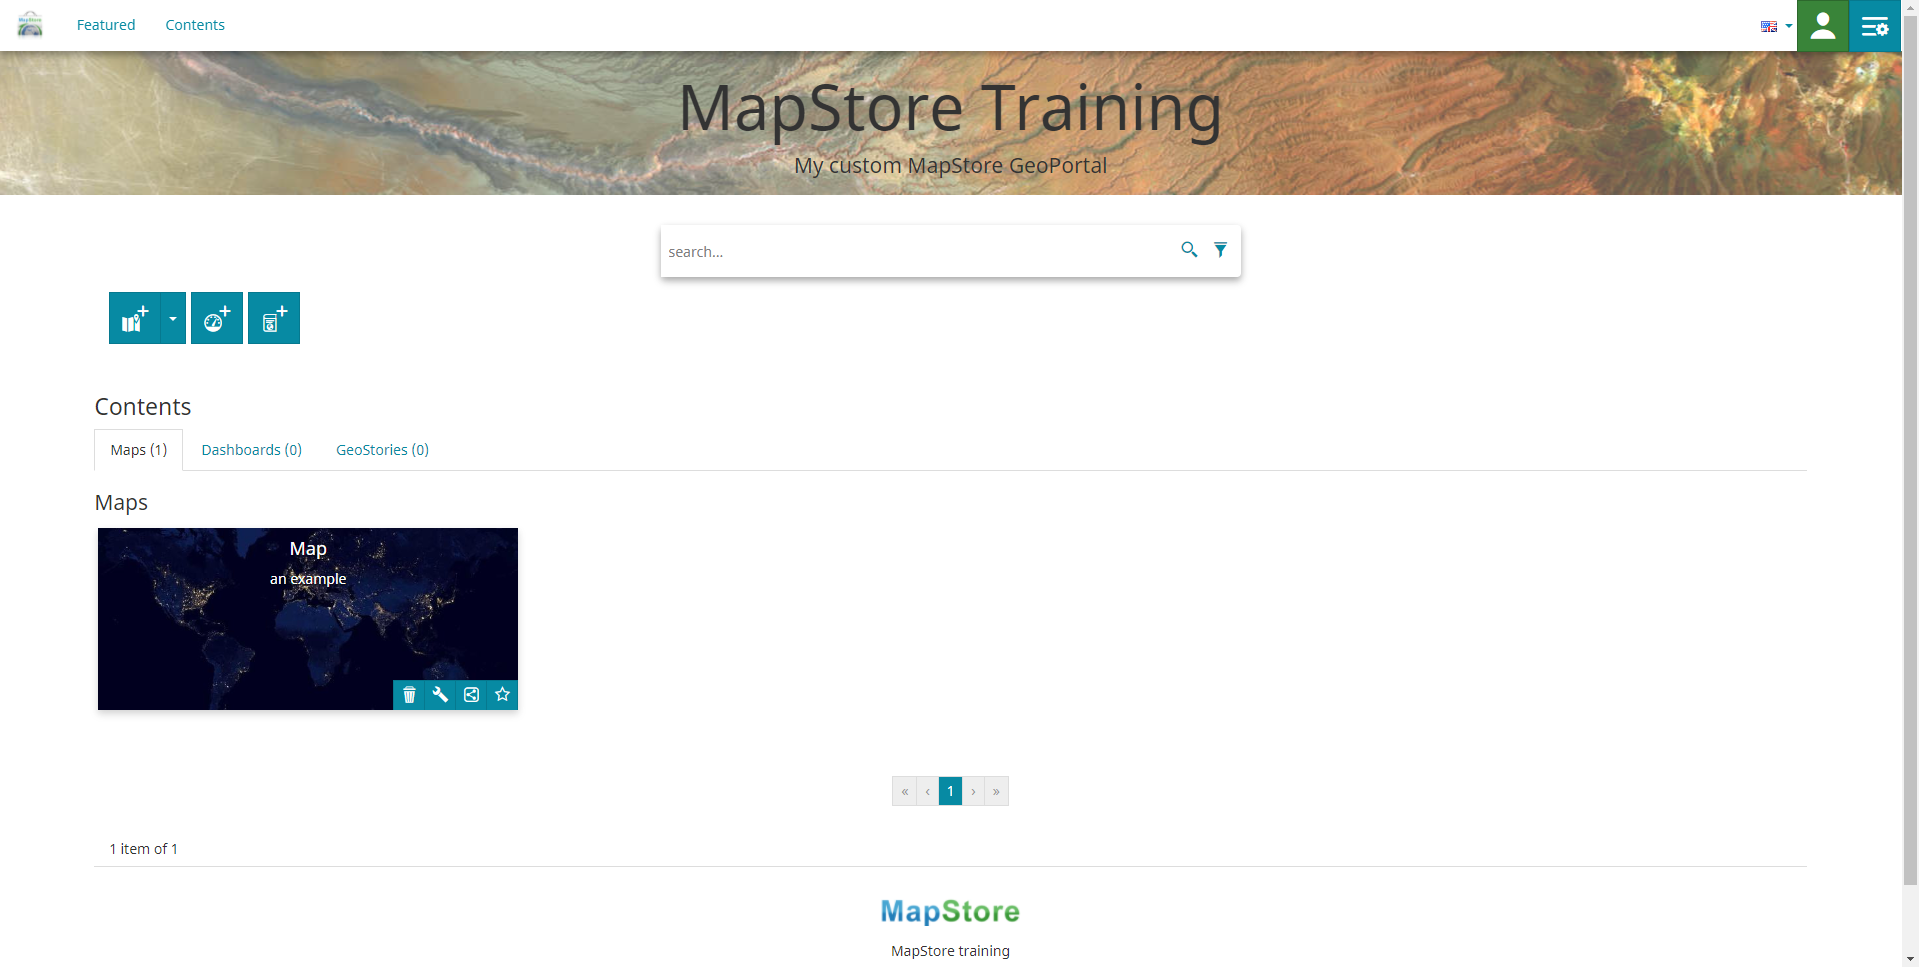 MapStore homepage with a custom text and translations